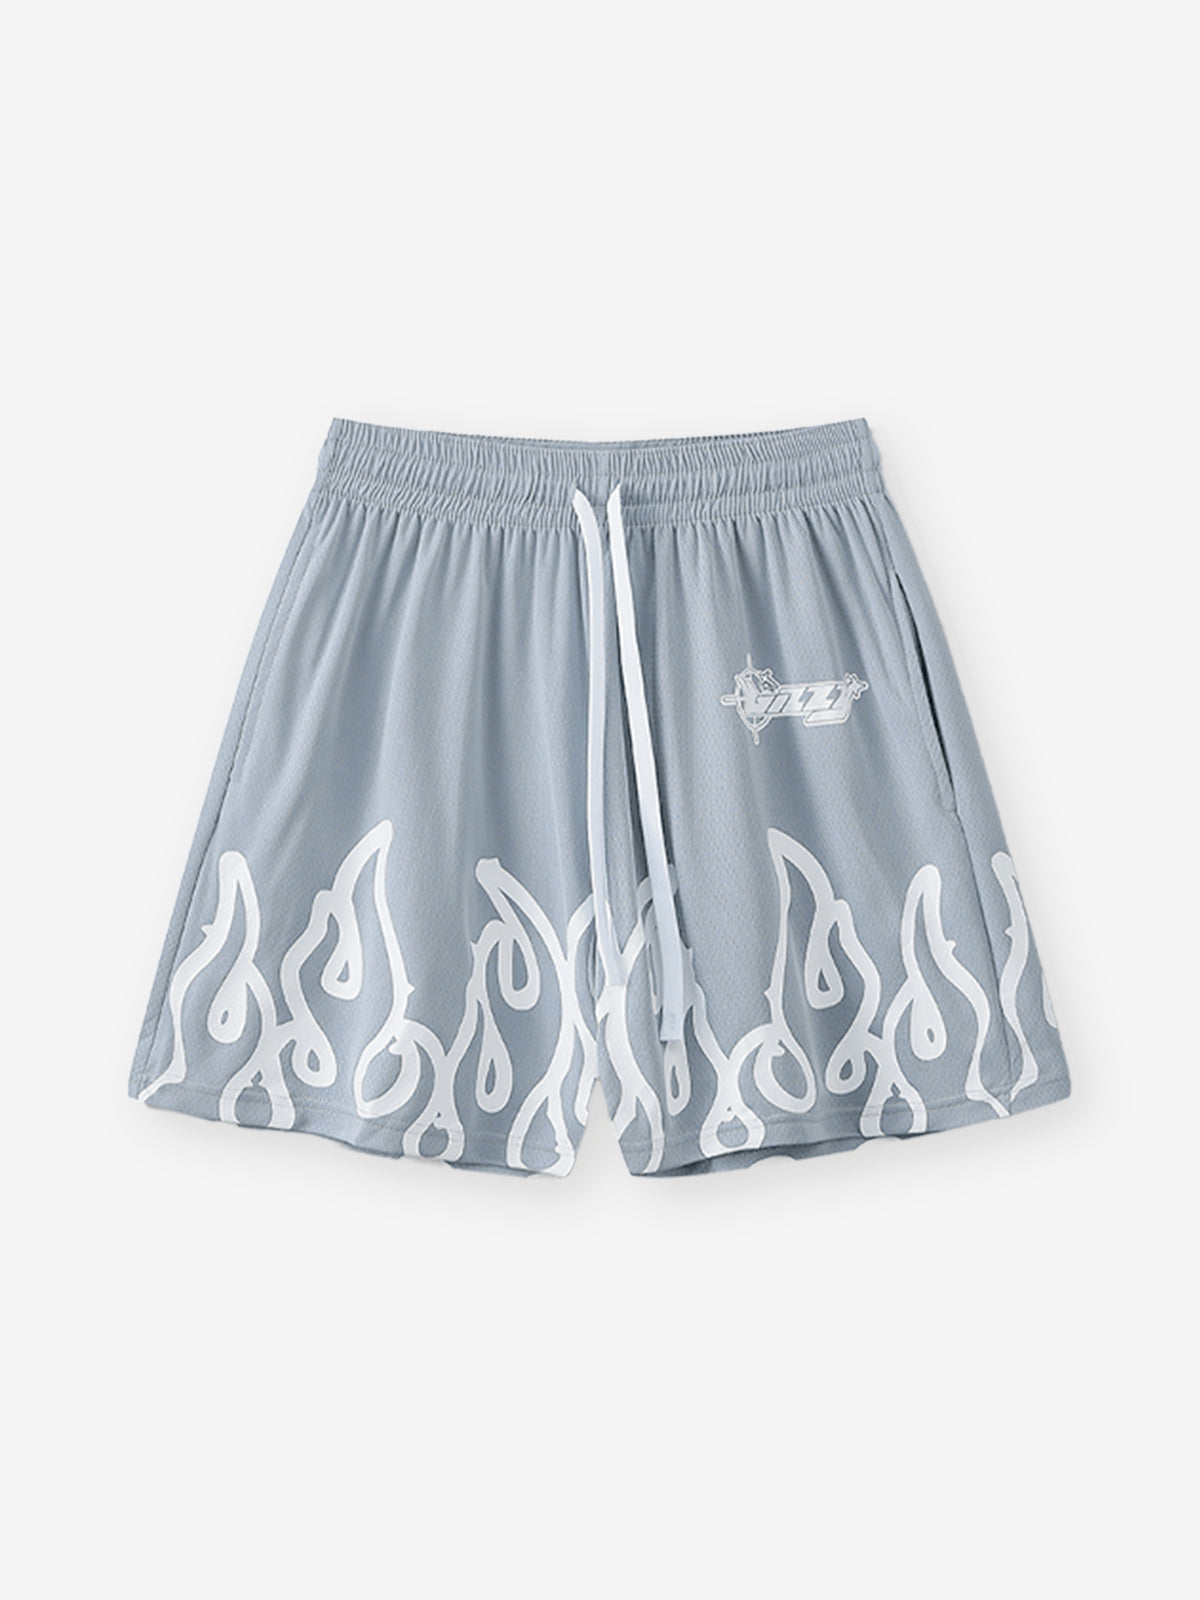 BOUNCE BACK© flame quick-drying shorts